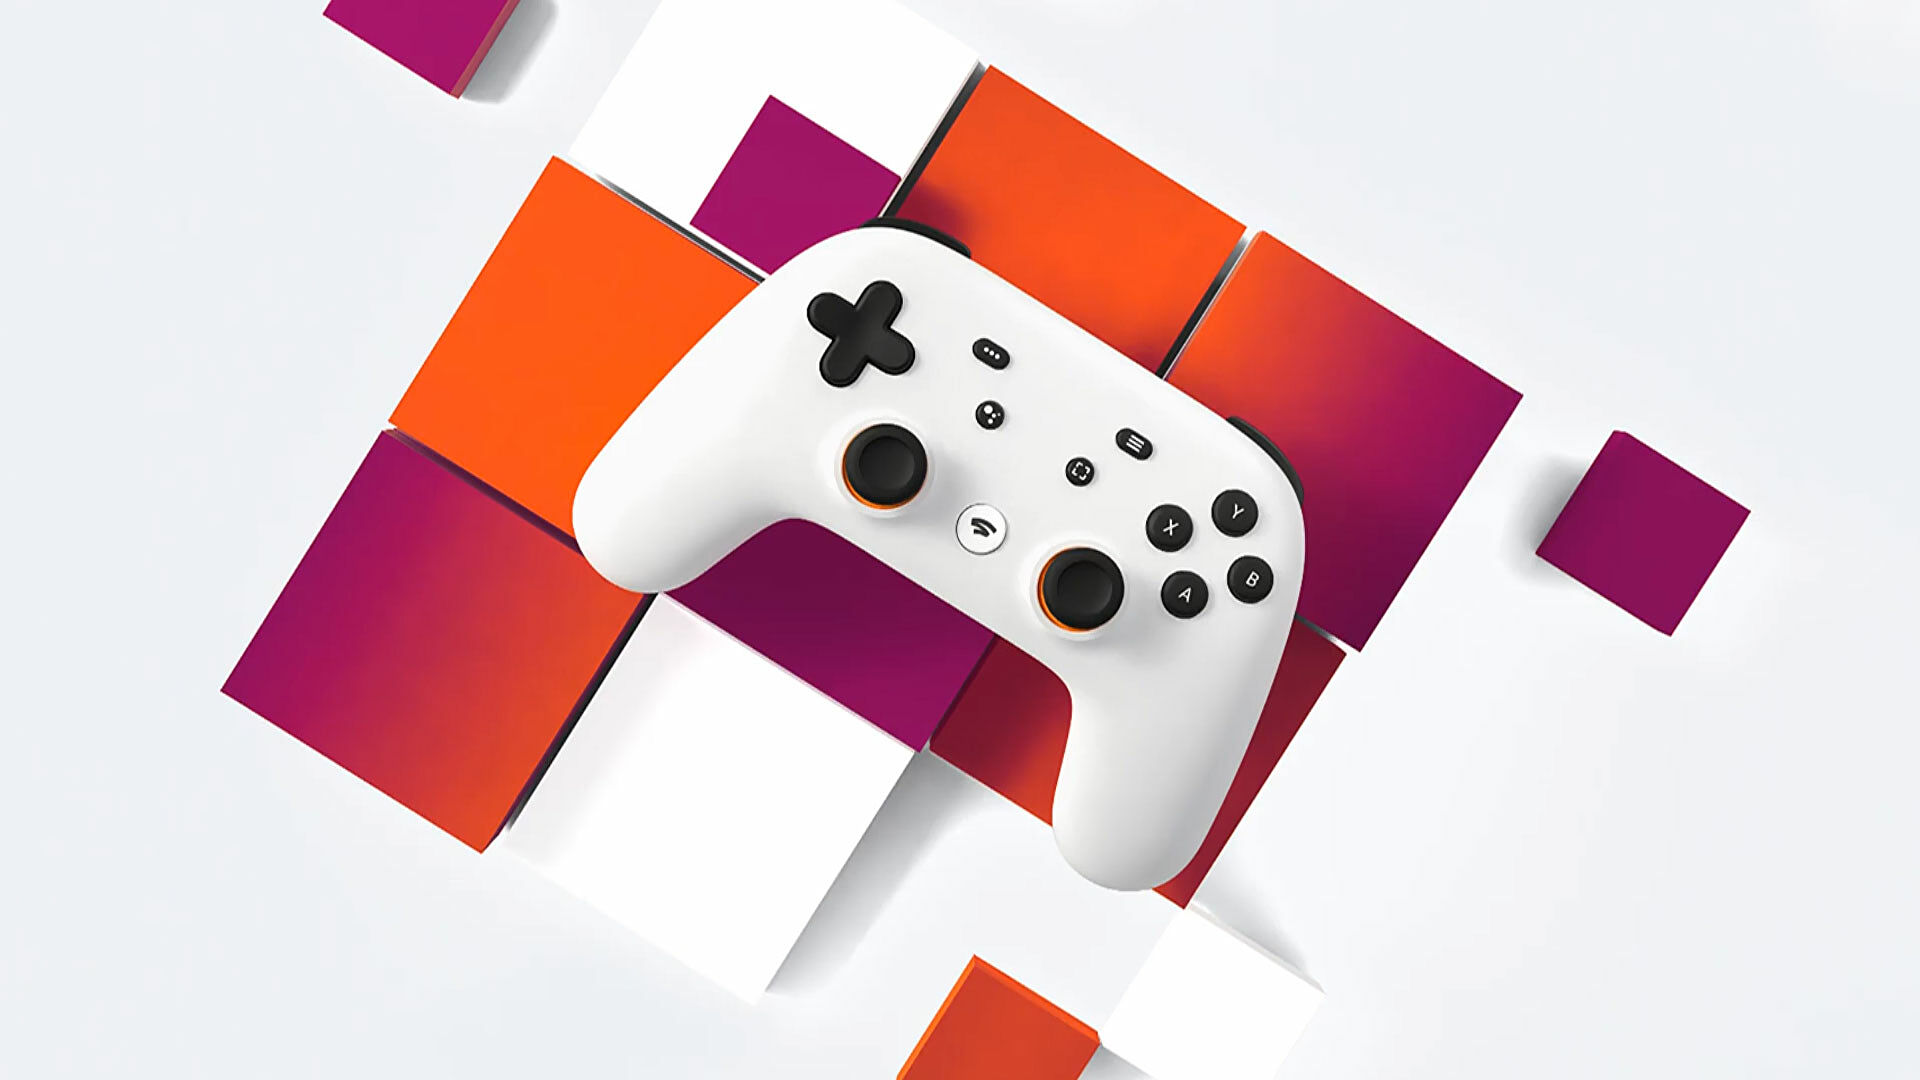 Google are pulling the plug on Stadia in January